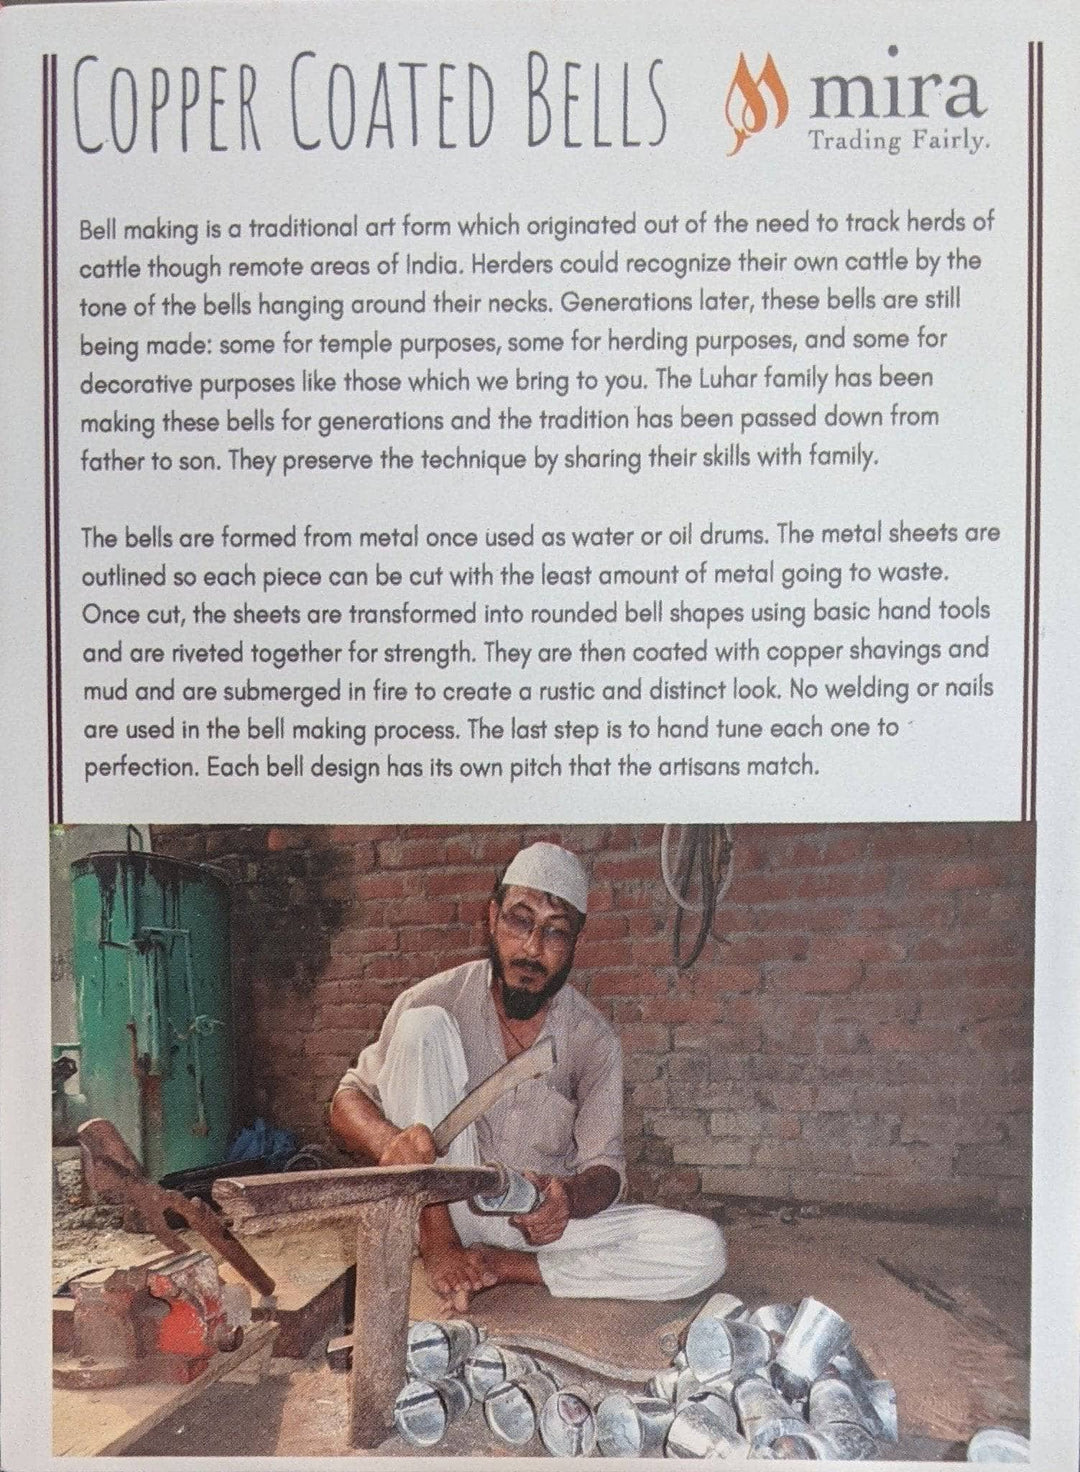 Pamphlet with text explaining the bell making tradition and process, image of artisan making bell at bottom.